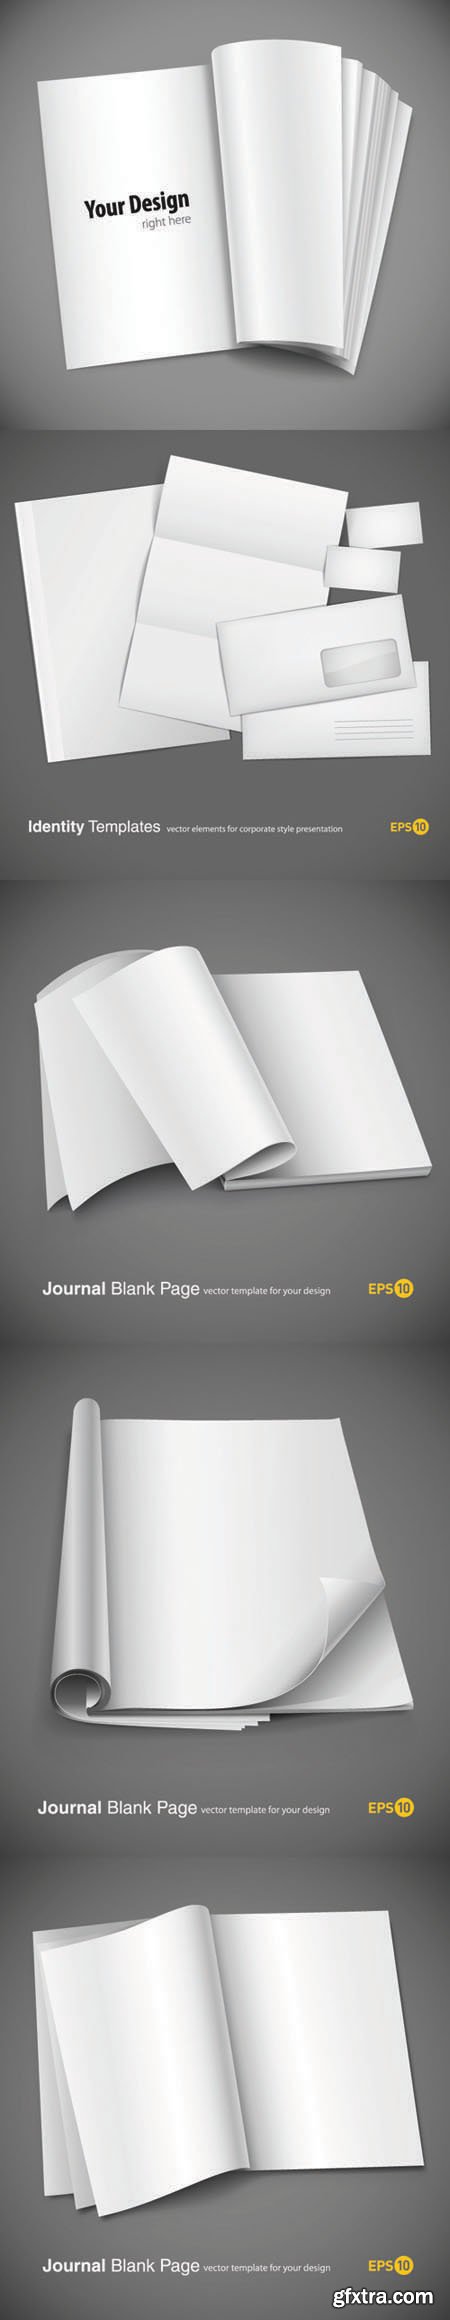 Set of Journal Blank Page Design Vector